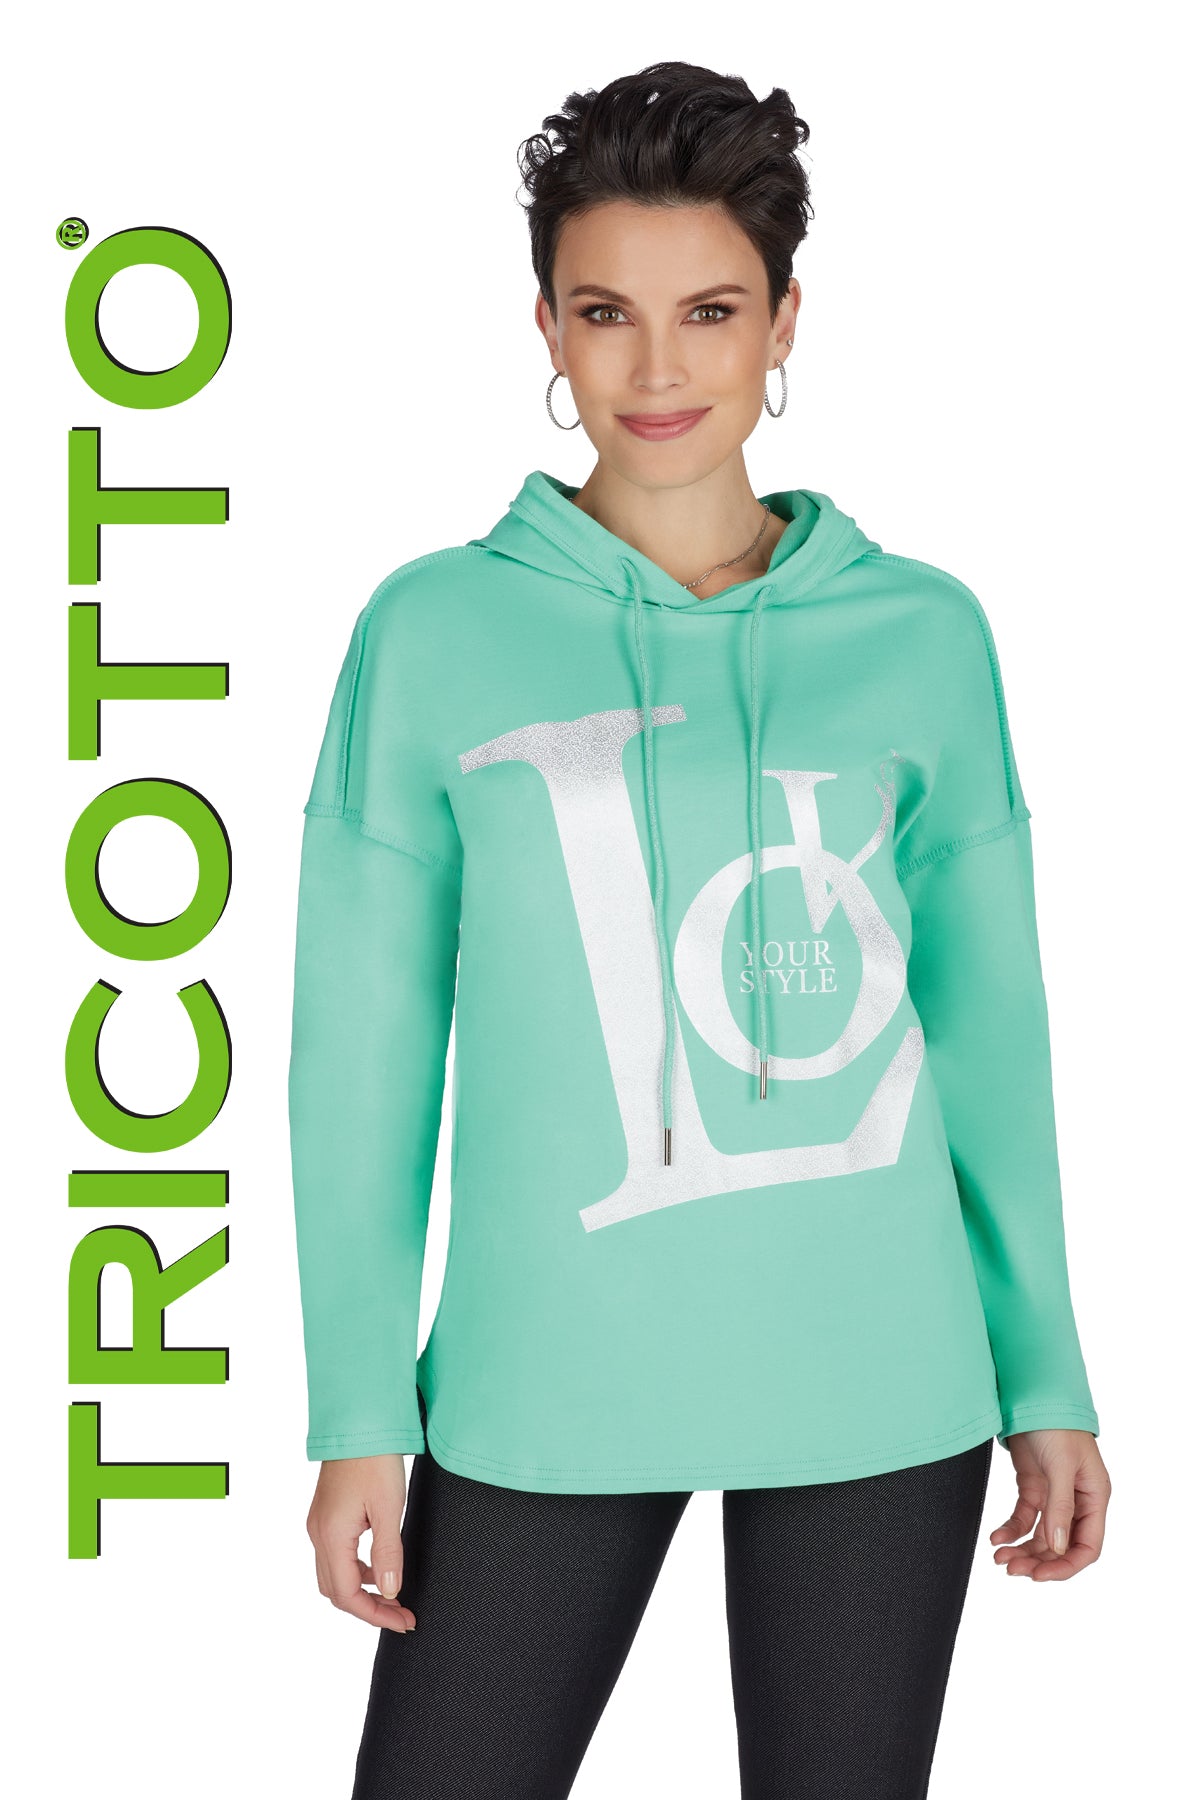 Tricotto Sweaters-Tricotto Clothing Montreal-Buy Tricotto Clothing Online-Tricotto Cotton Sweaters-Tricotto Online Shop-Women's Sweaters